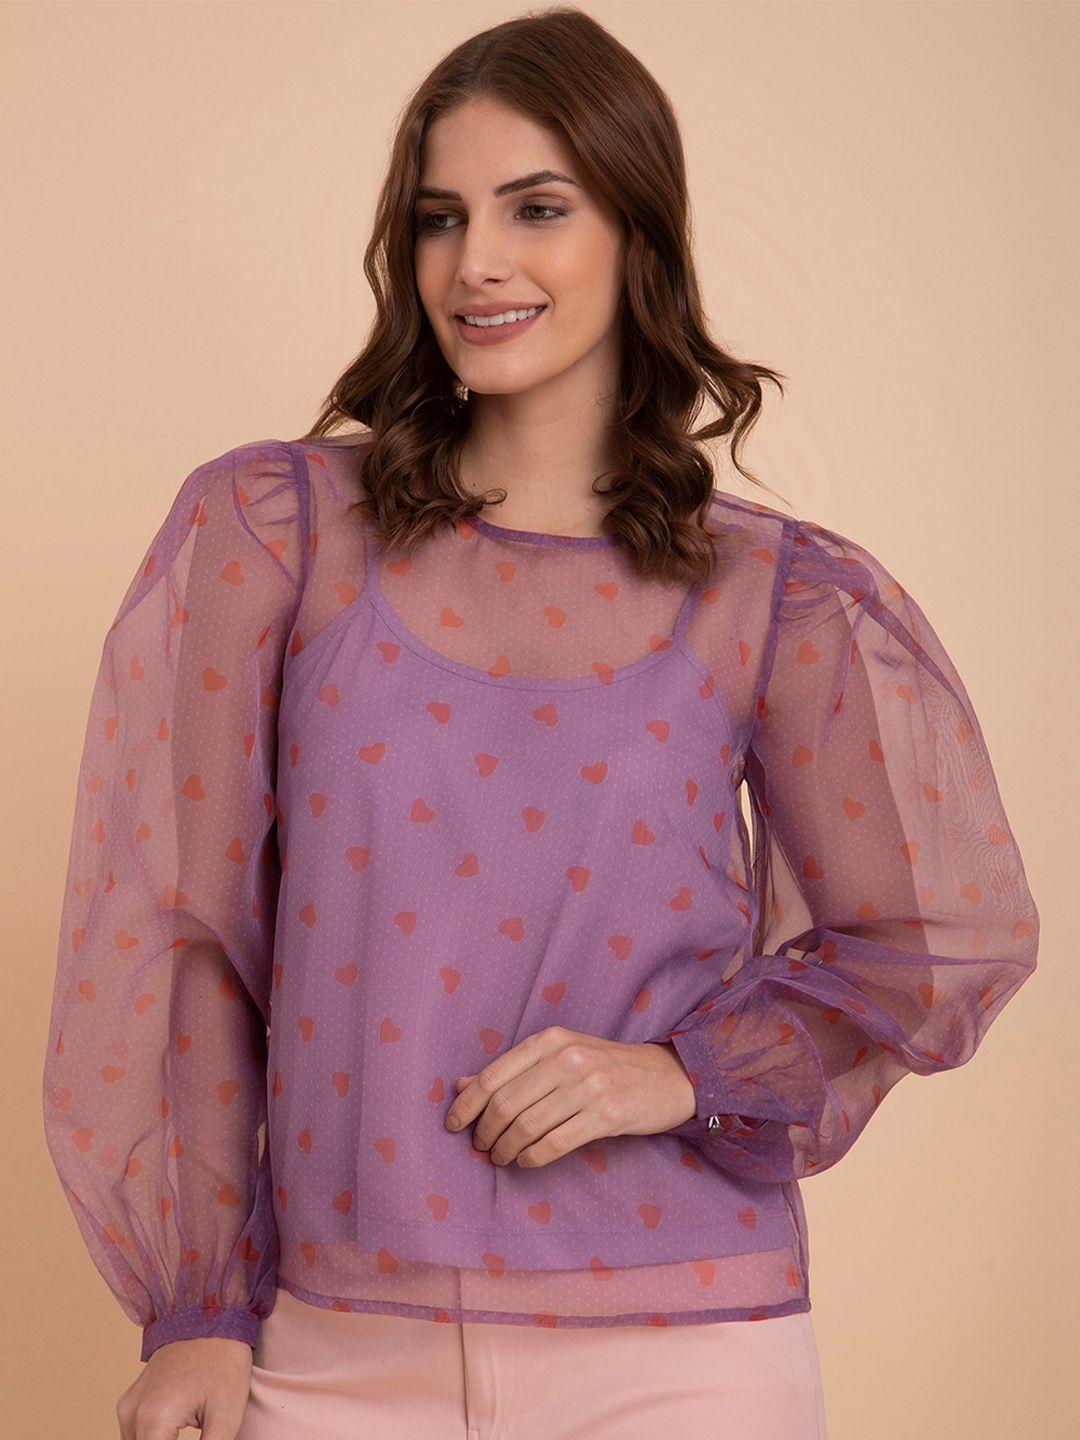 fablestreet round neck top